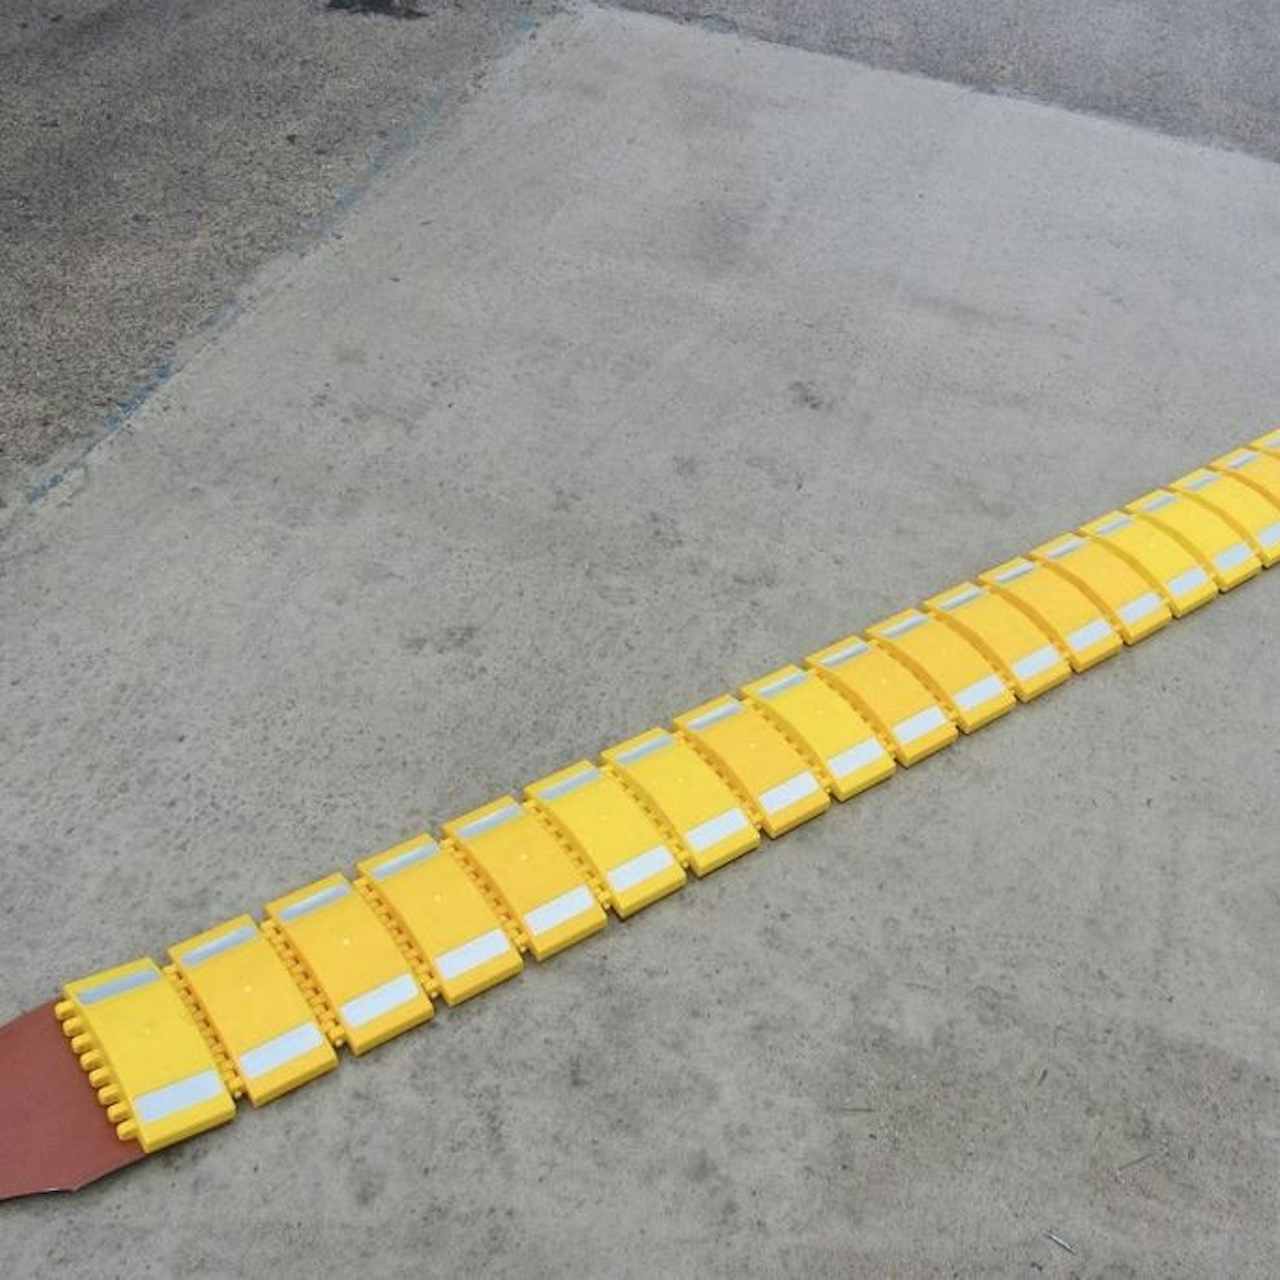 temporary speed bumps